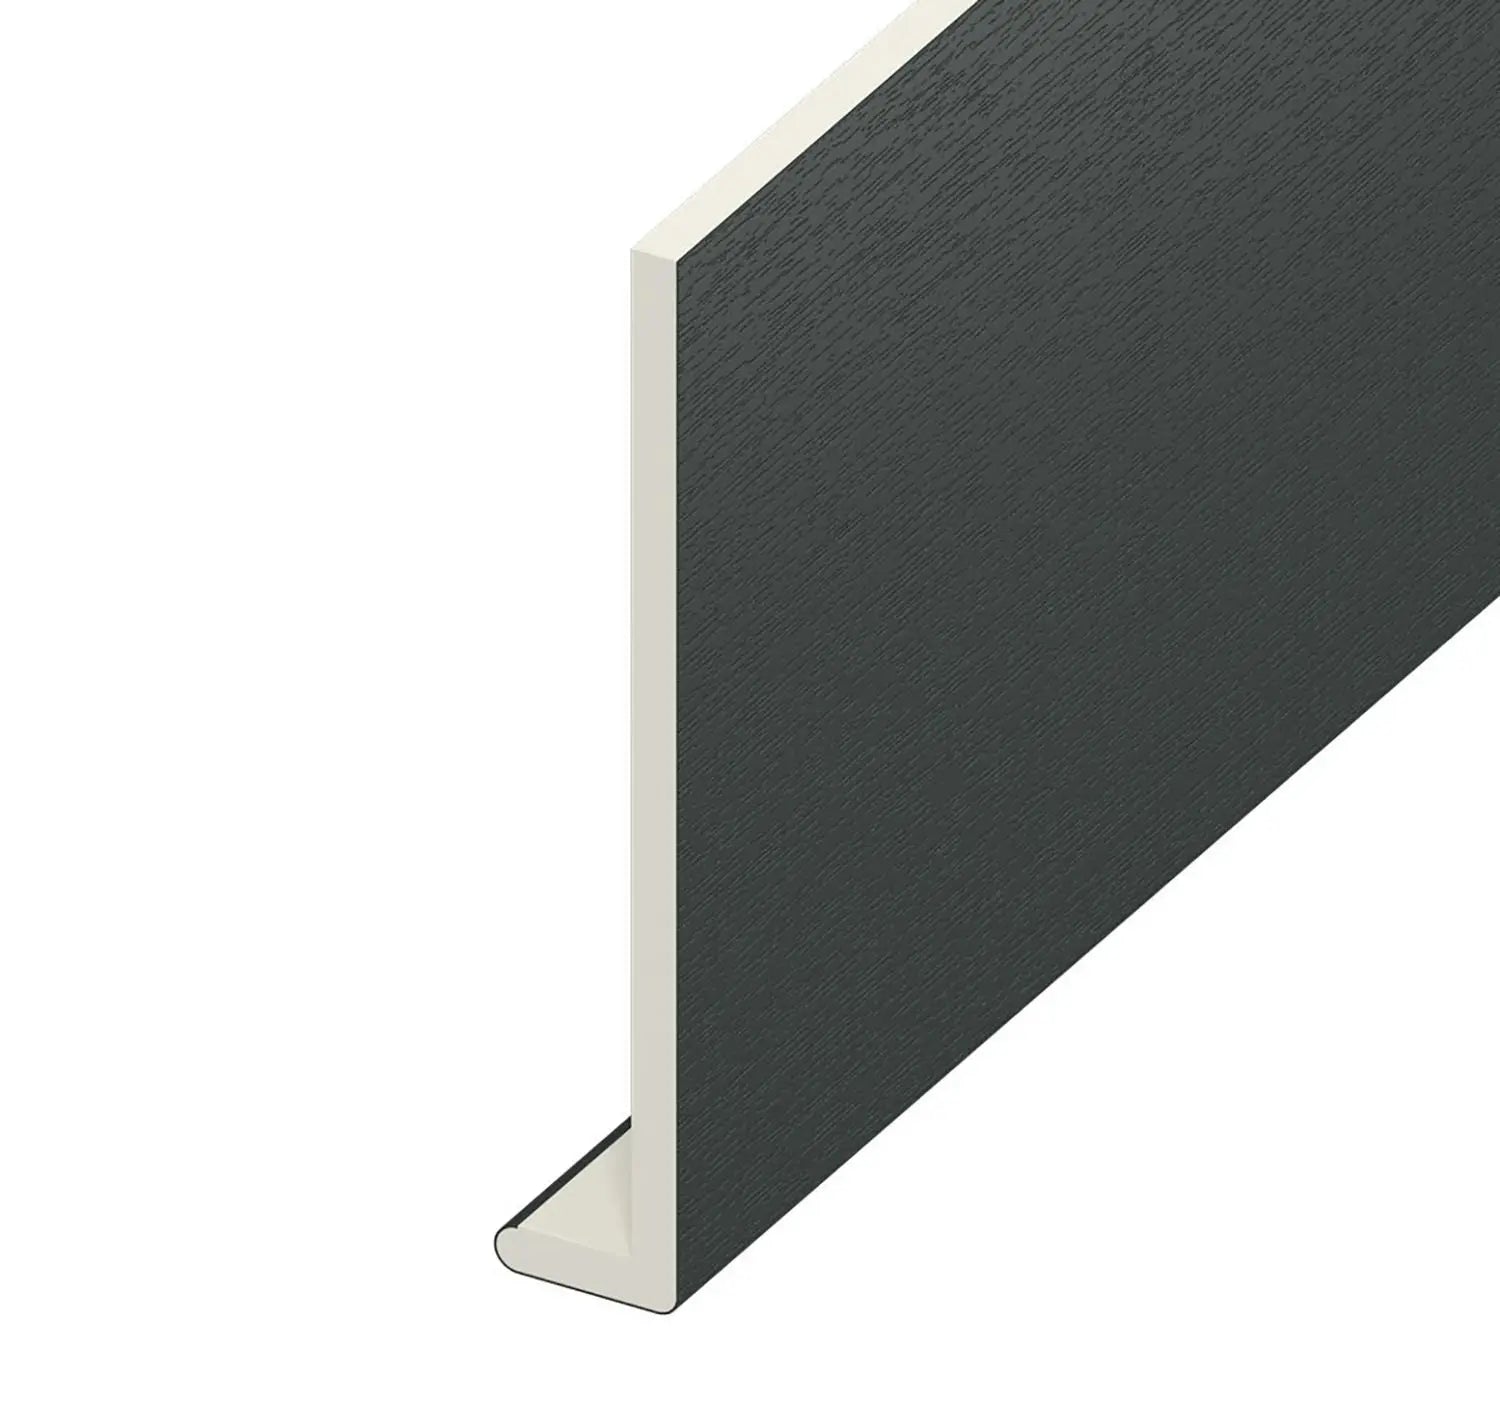 UPVC FASCIAS & SOFFITS Cover Boards /and Replacement Boards  --Free Delivery Apex Fibre Glass Roofing Supplies